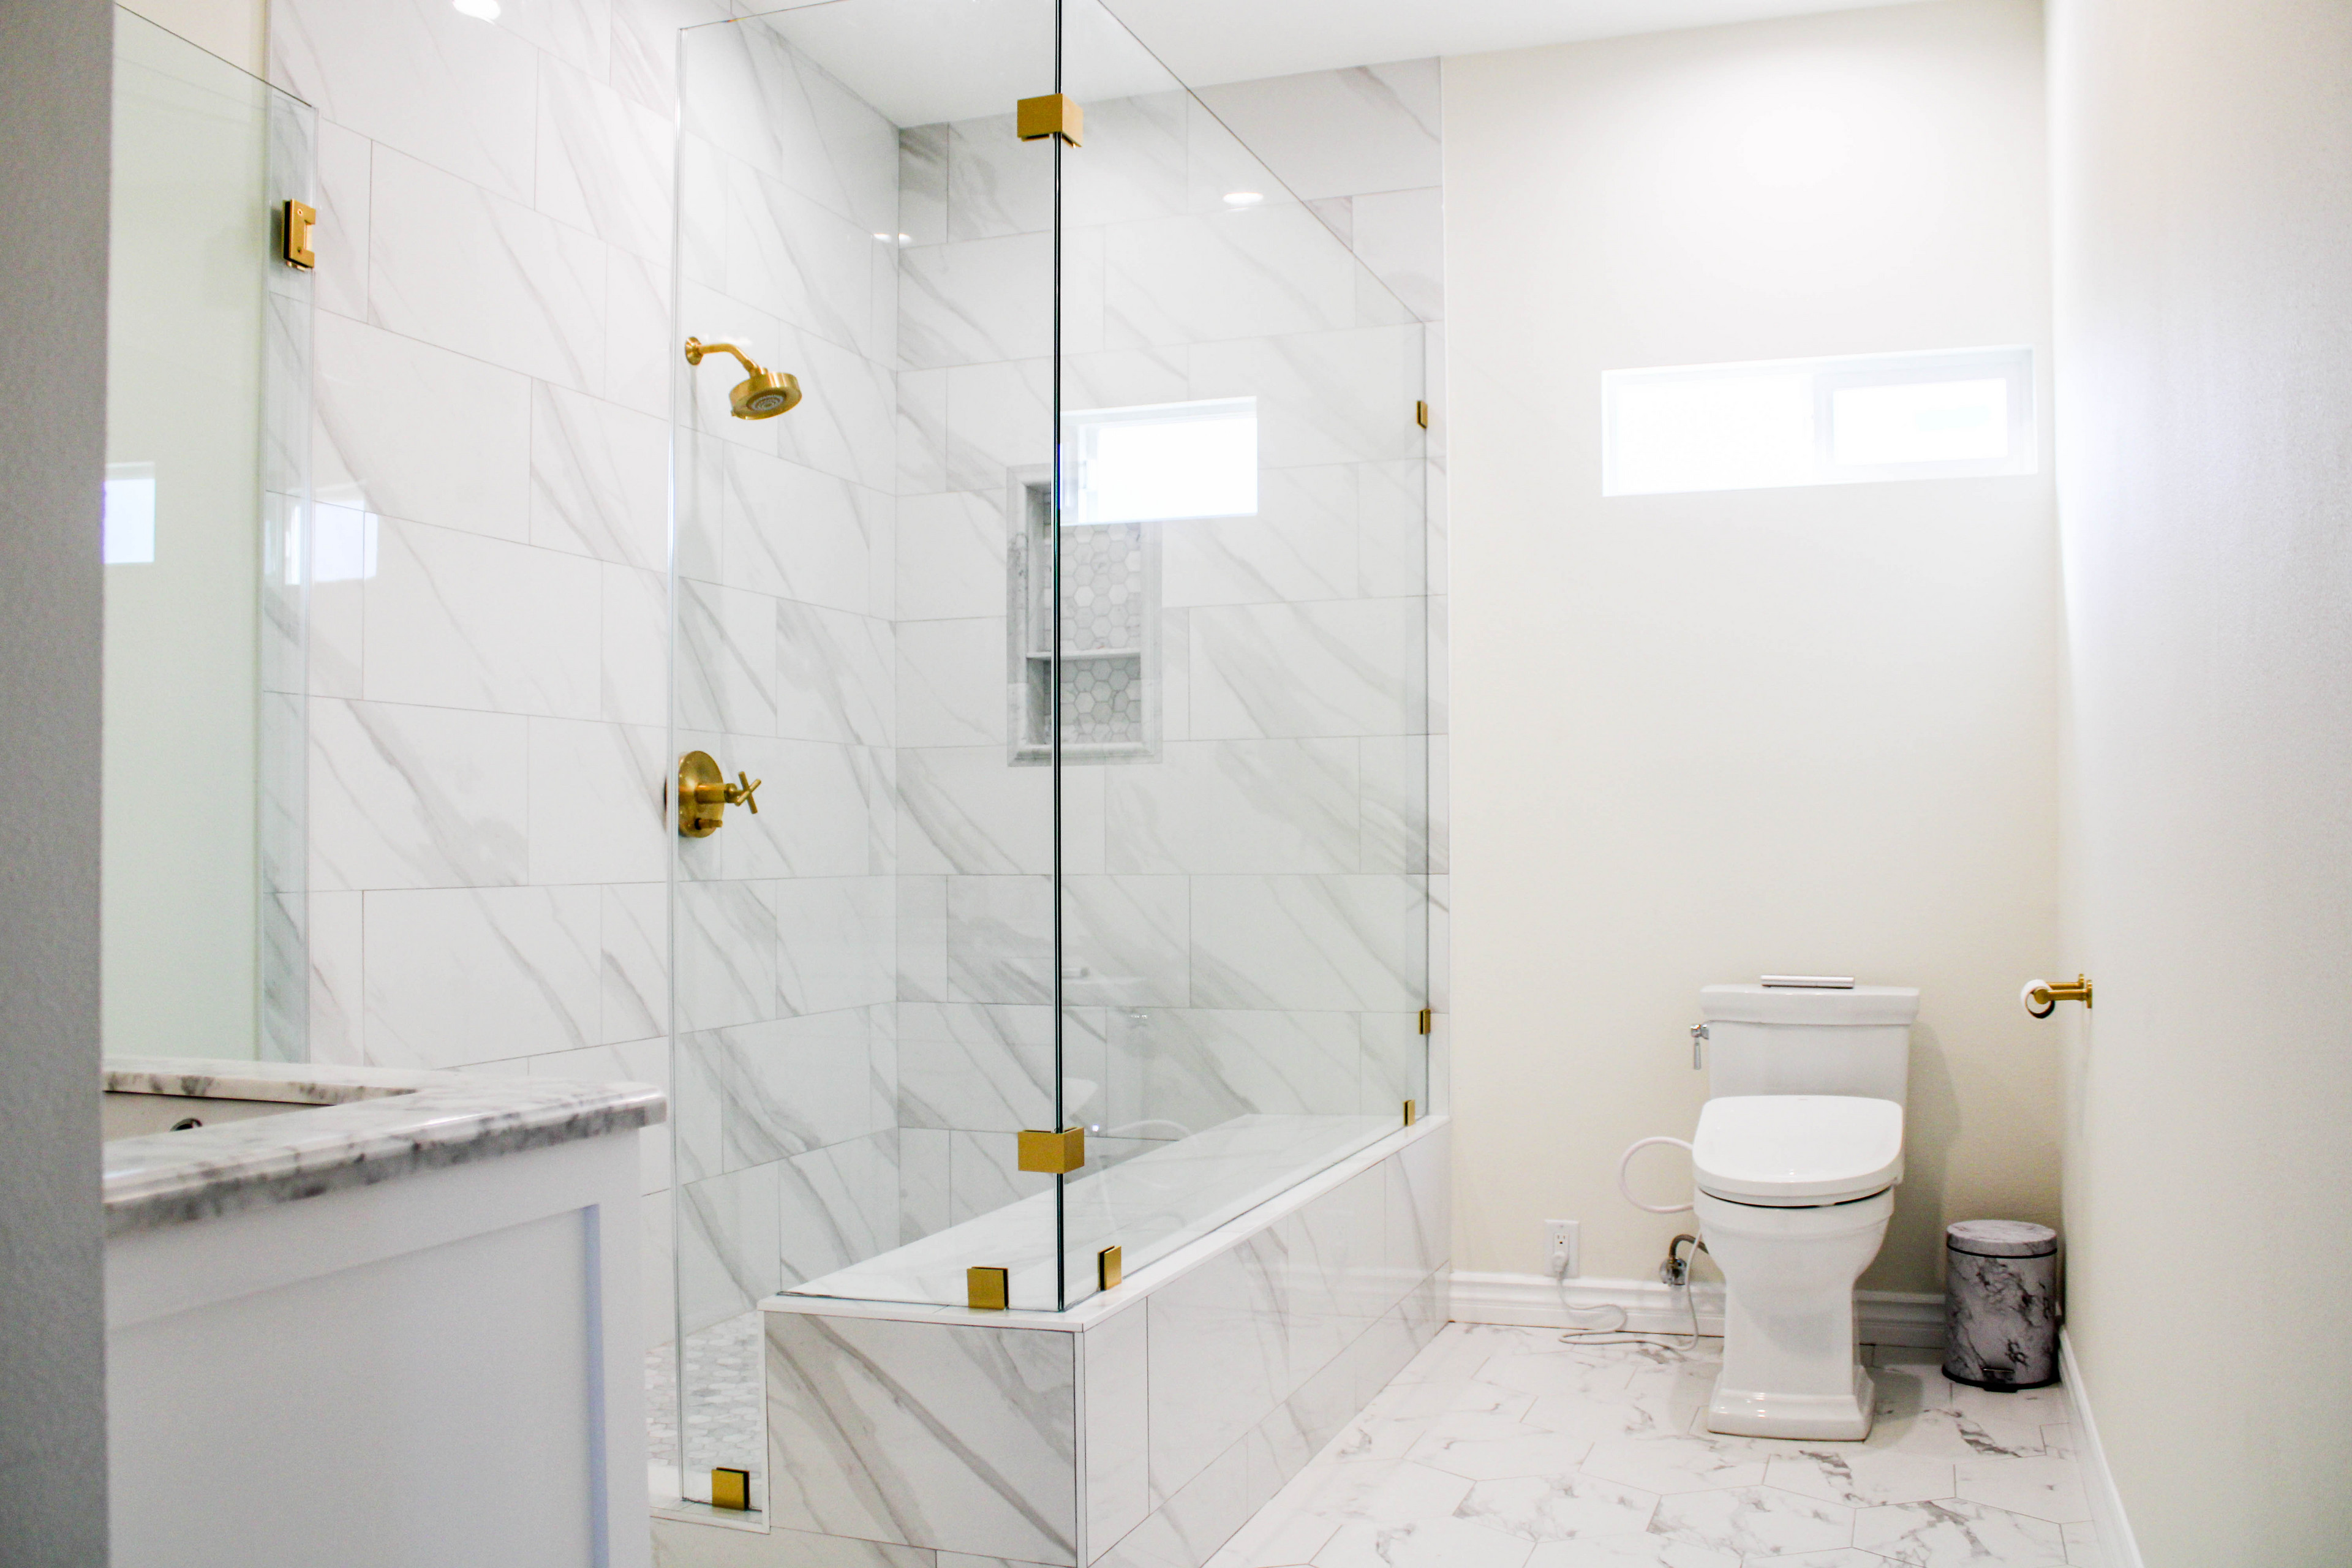 All Tile Installation; Shower, Floor, and Vanity Addition